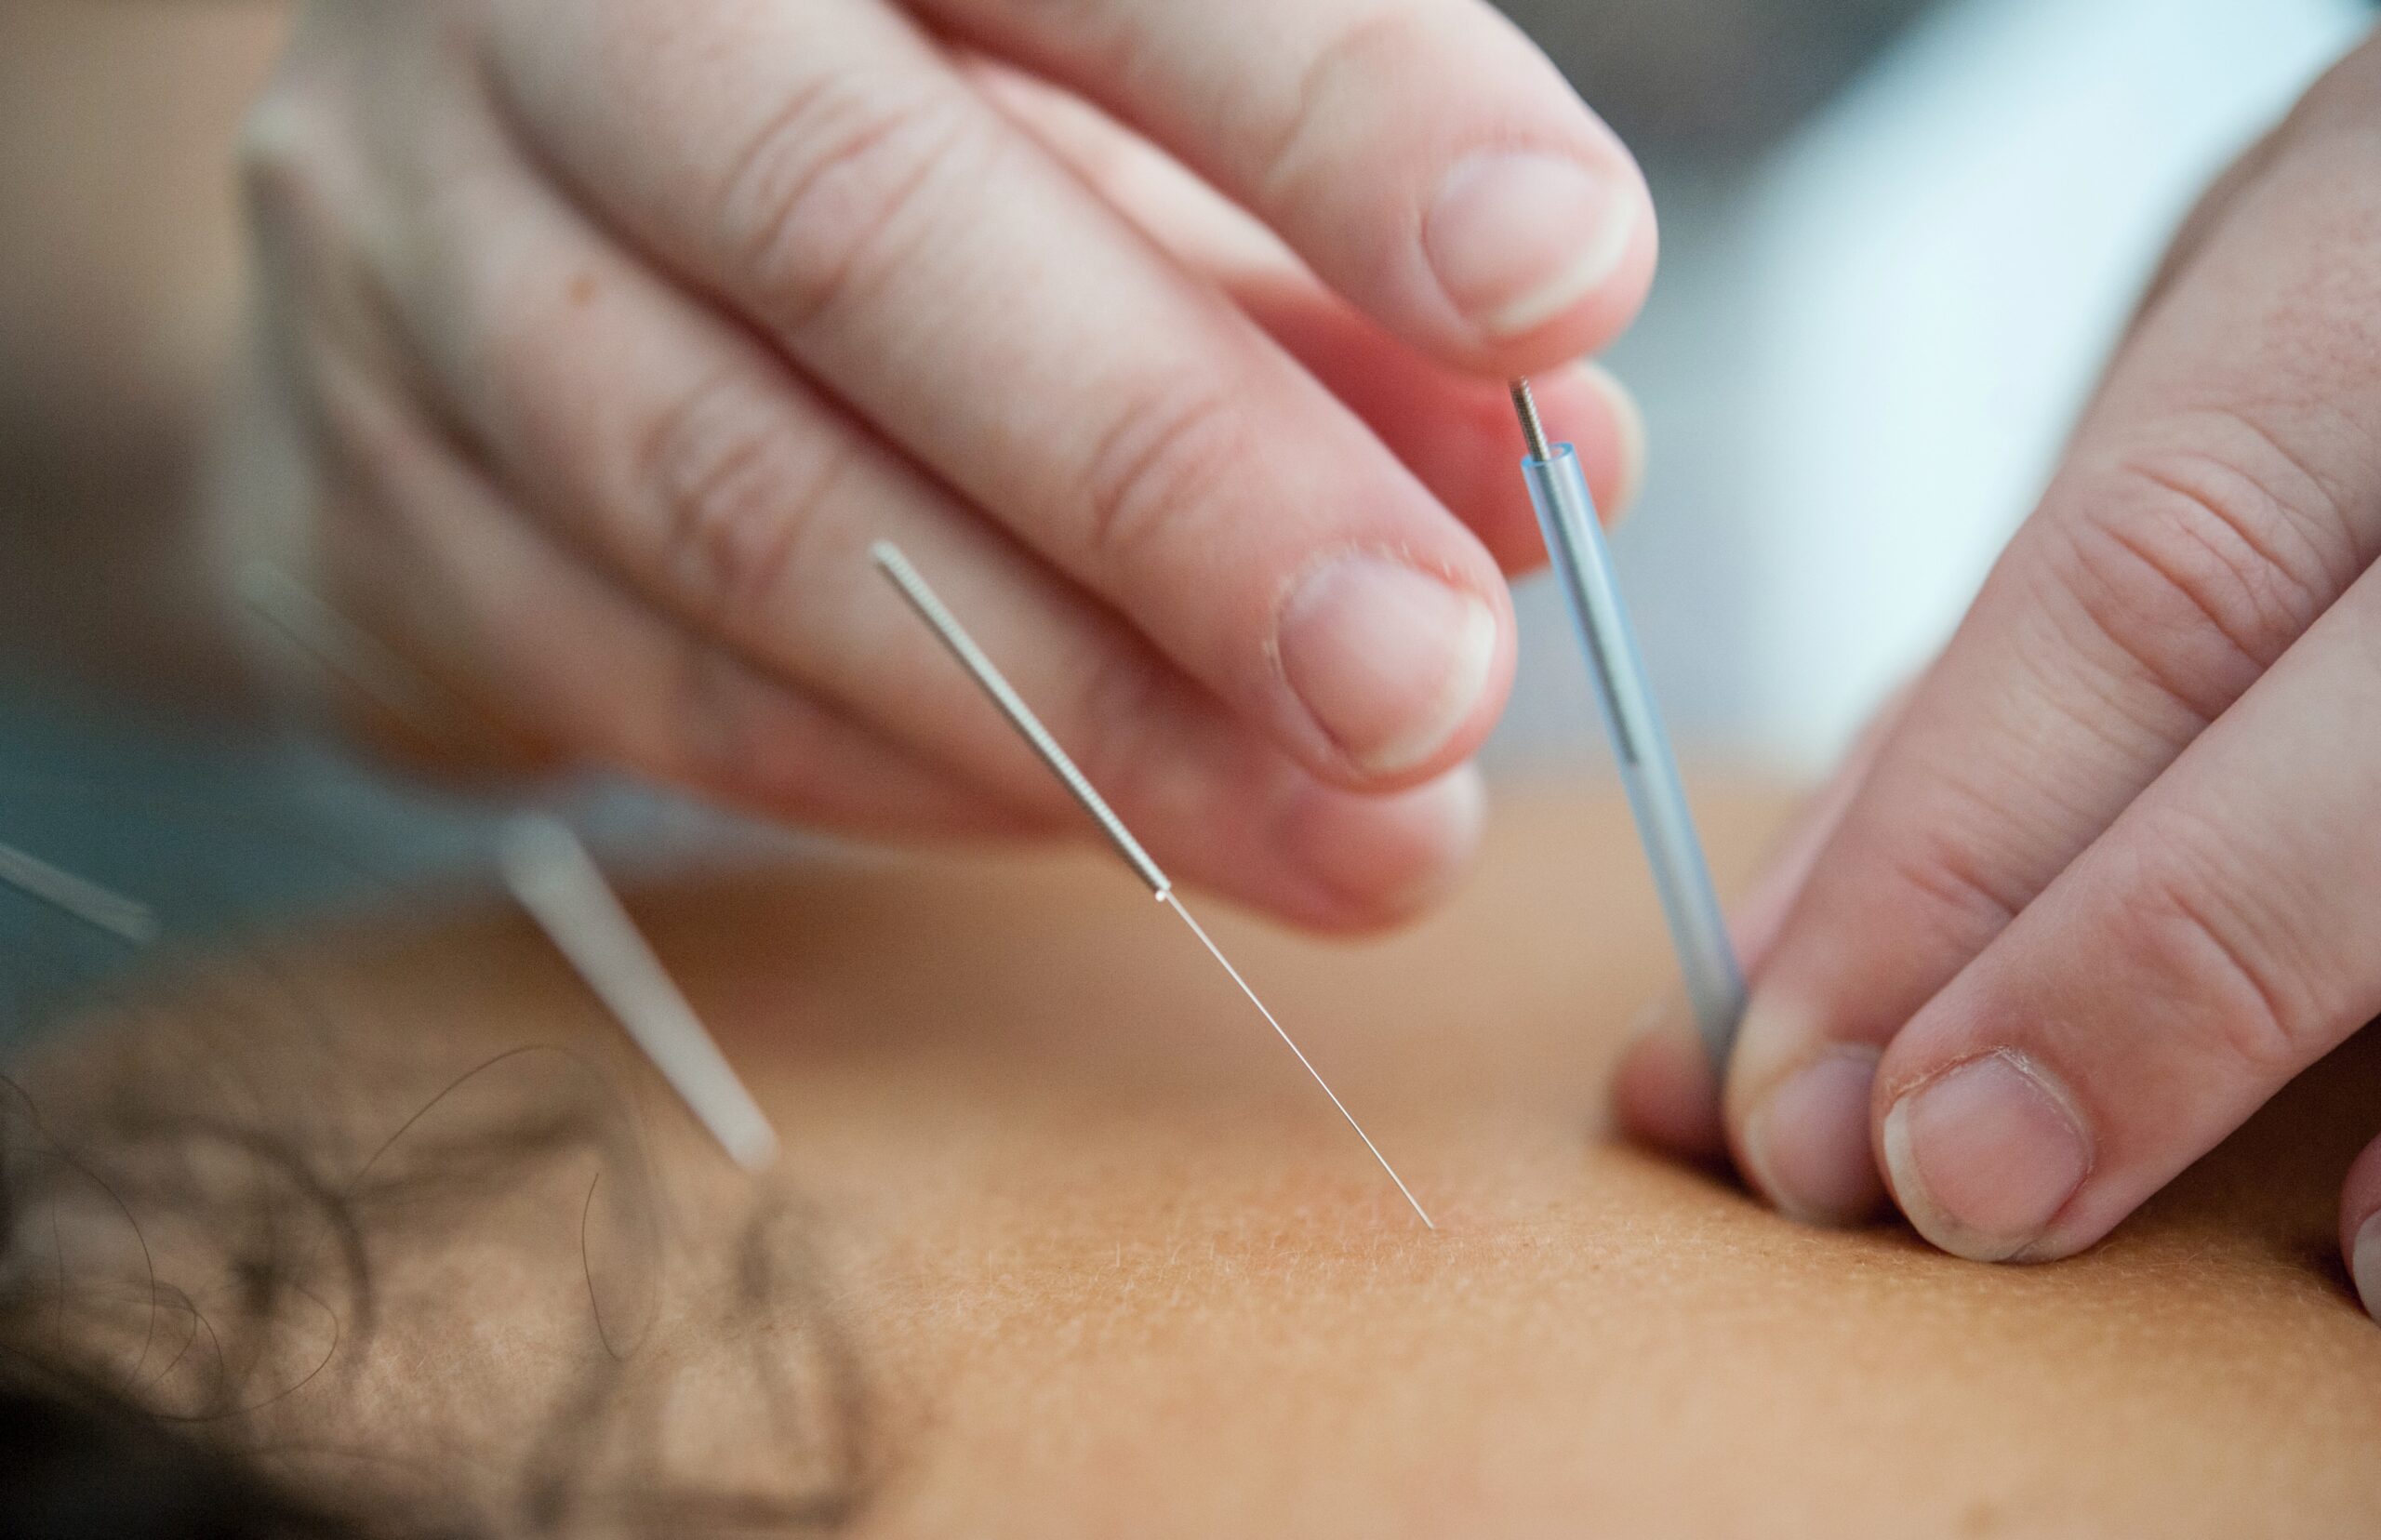 Acupuncture Point Injection Training